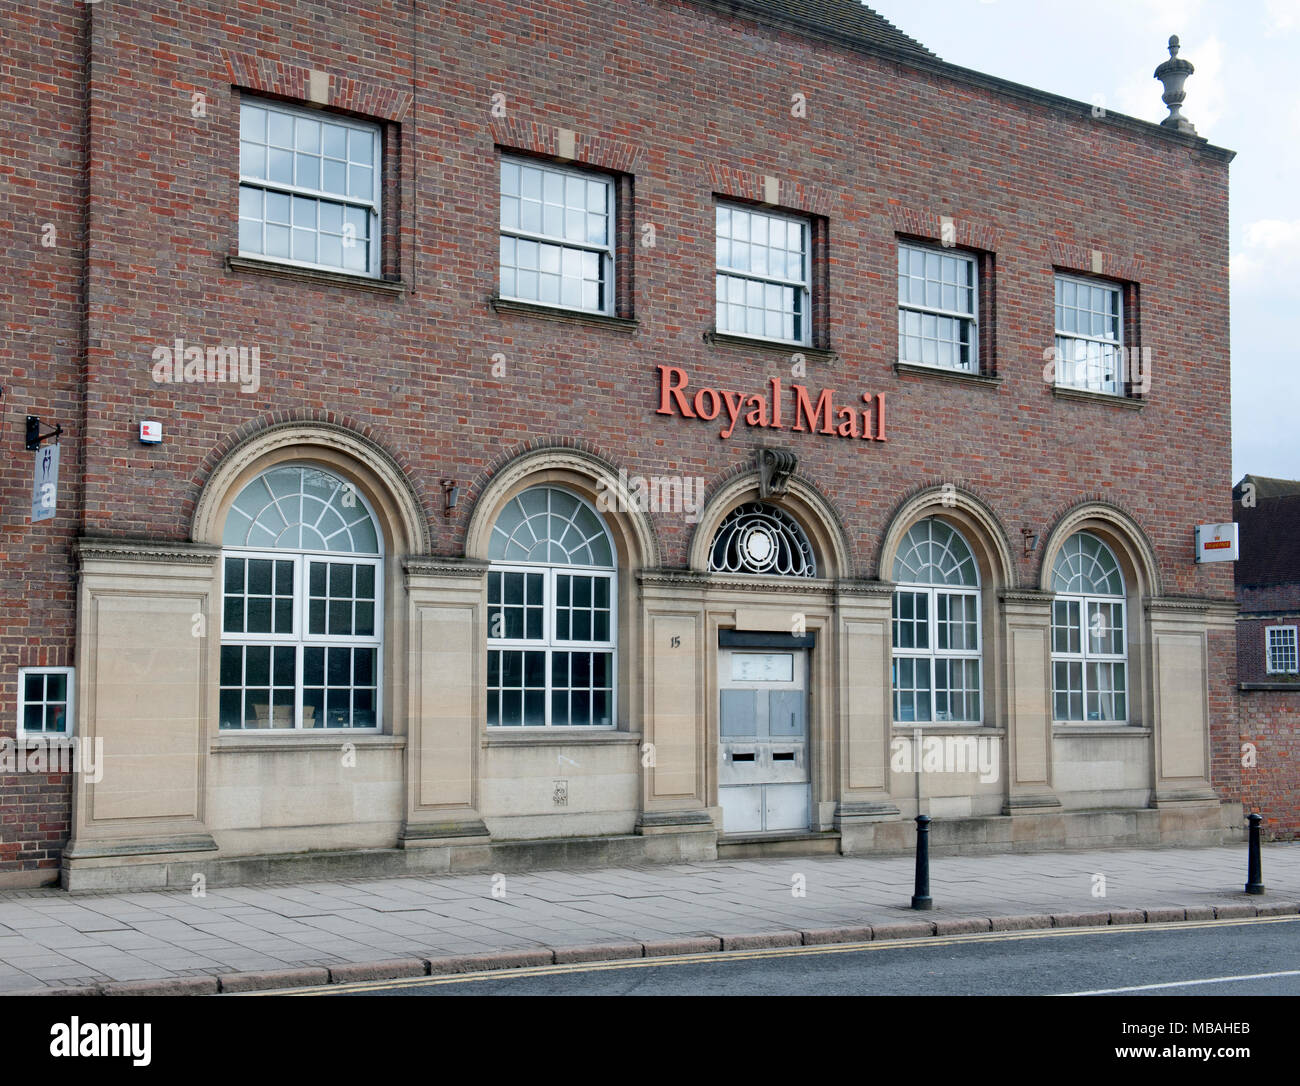 Royal Mail High Wycombe Lieferung Office, Queen Victoria Road, High Wycombe, Buckinghamshire, England, Großbritannien Stockfoto